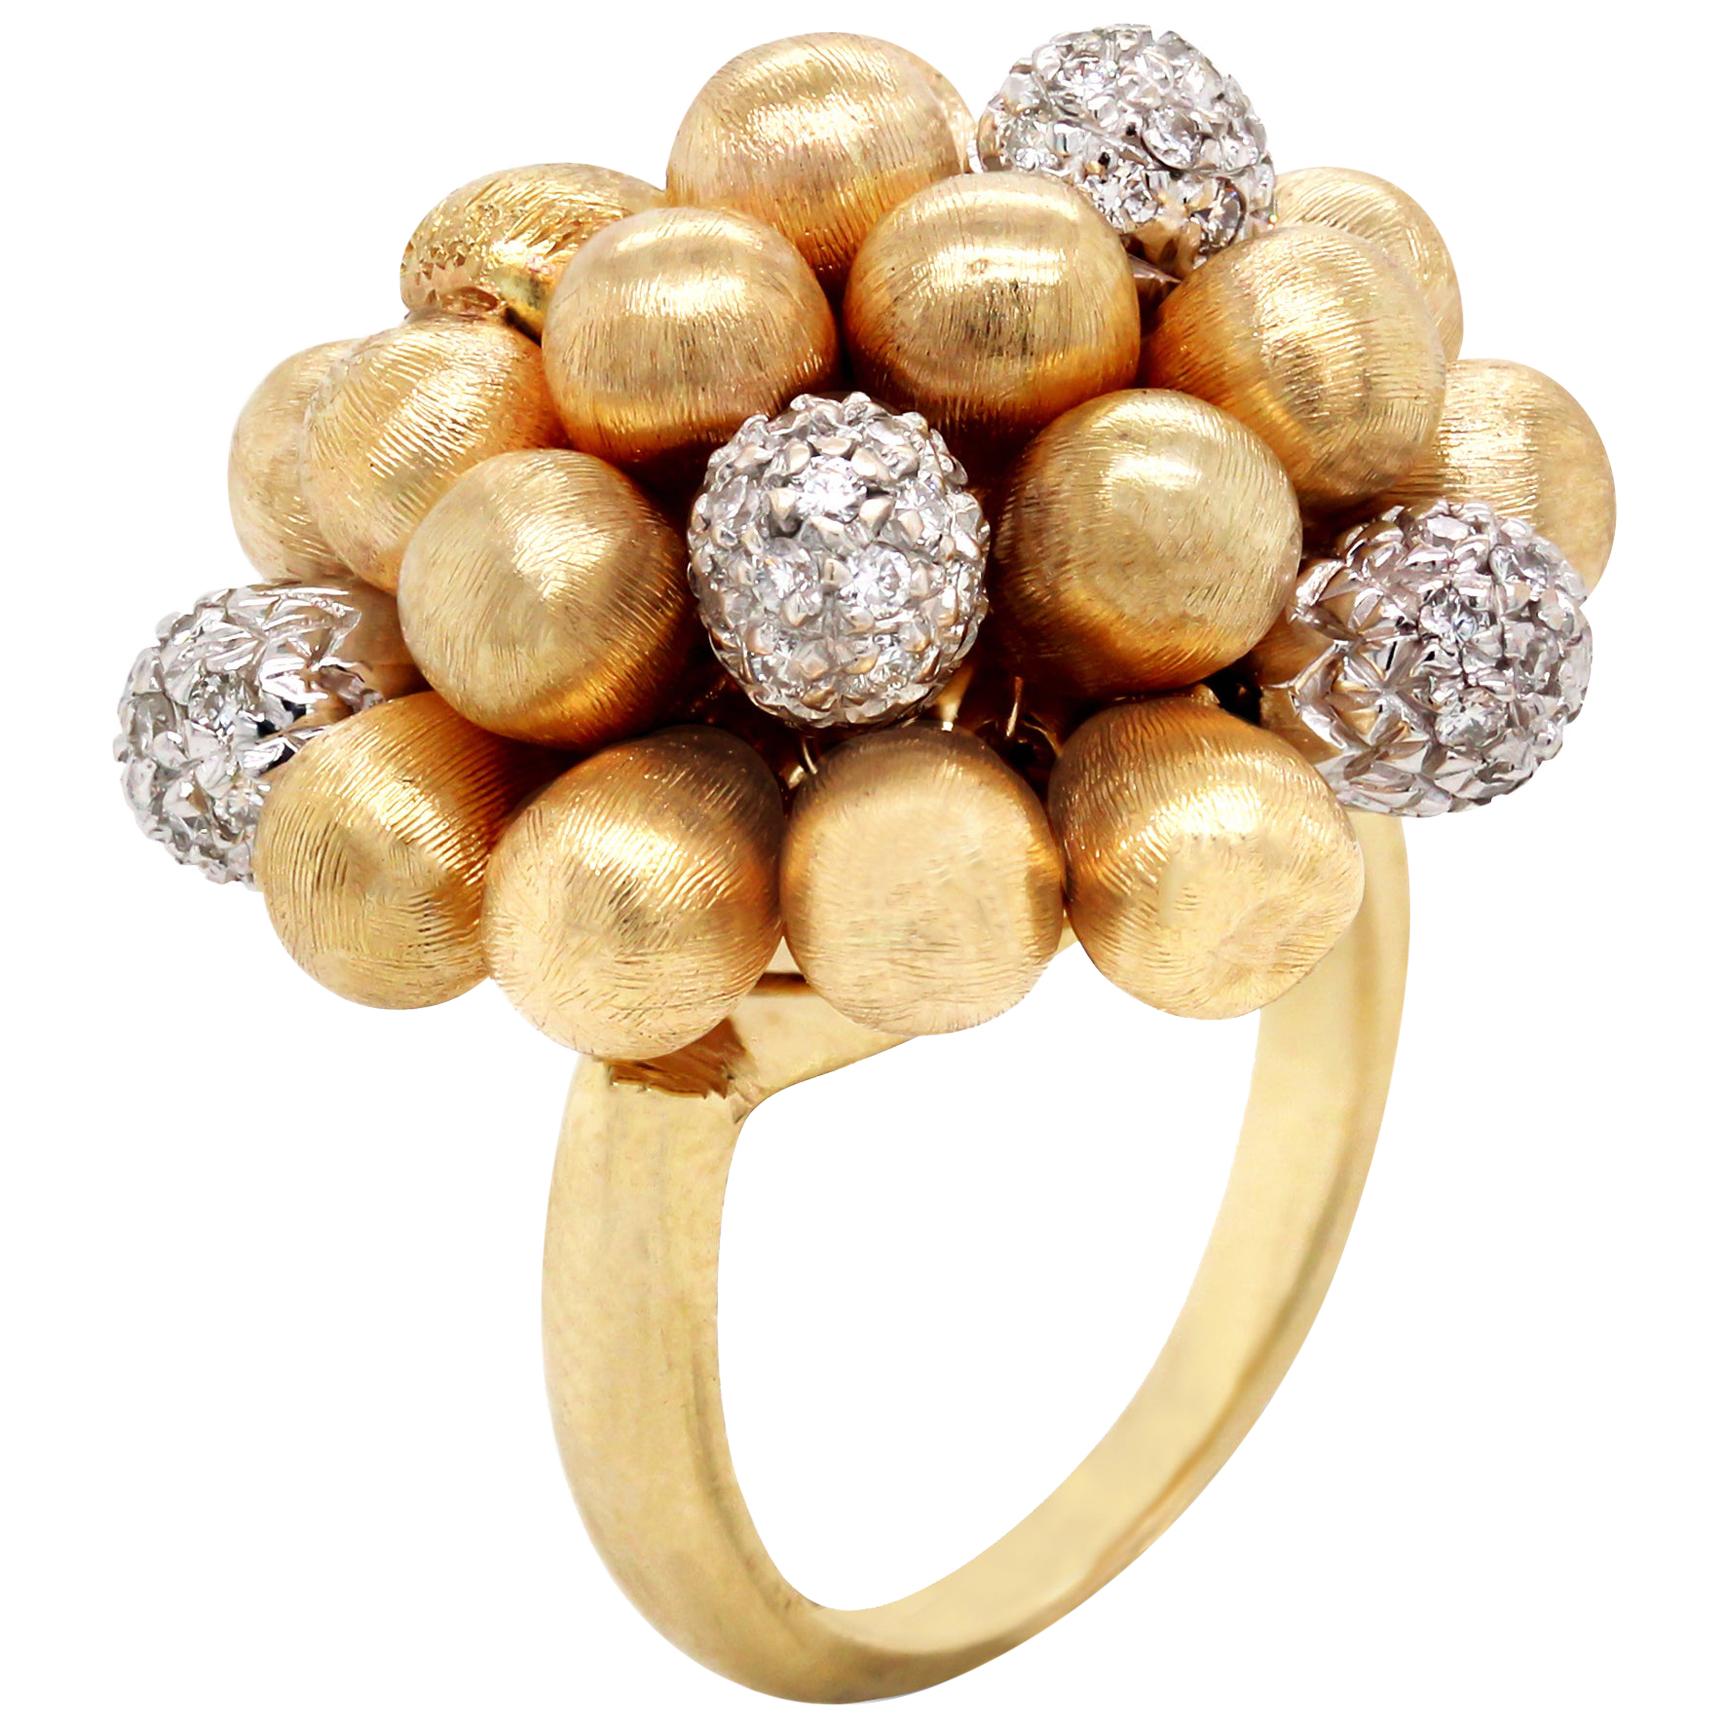 Marco Bicego Yellow White Gold and Diamond Ring